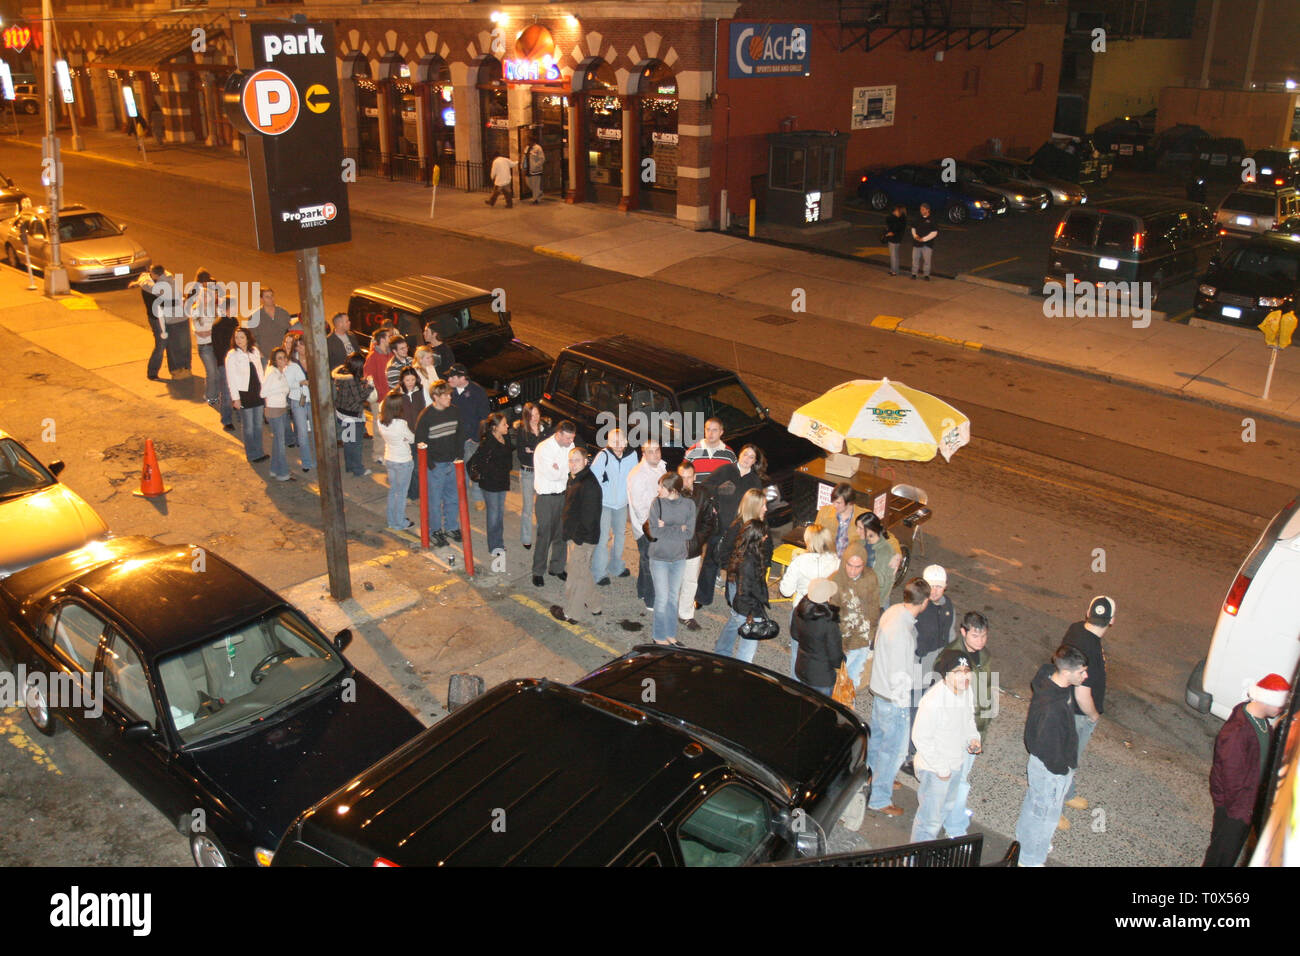 Concert goers are shown lined up on the streets of Hartford waiting to enter a club for a 'live' concert performance. Stock Photo